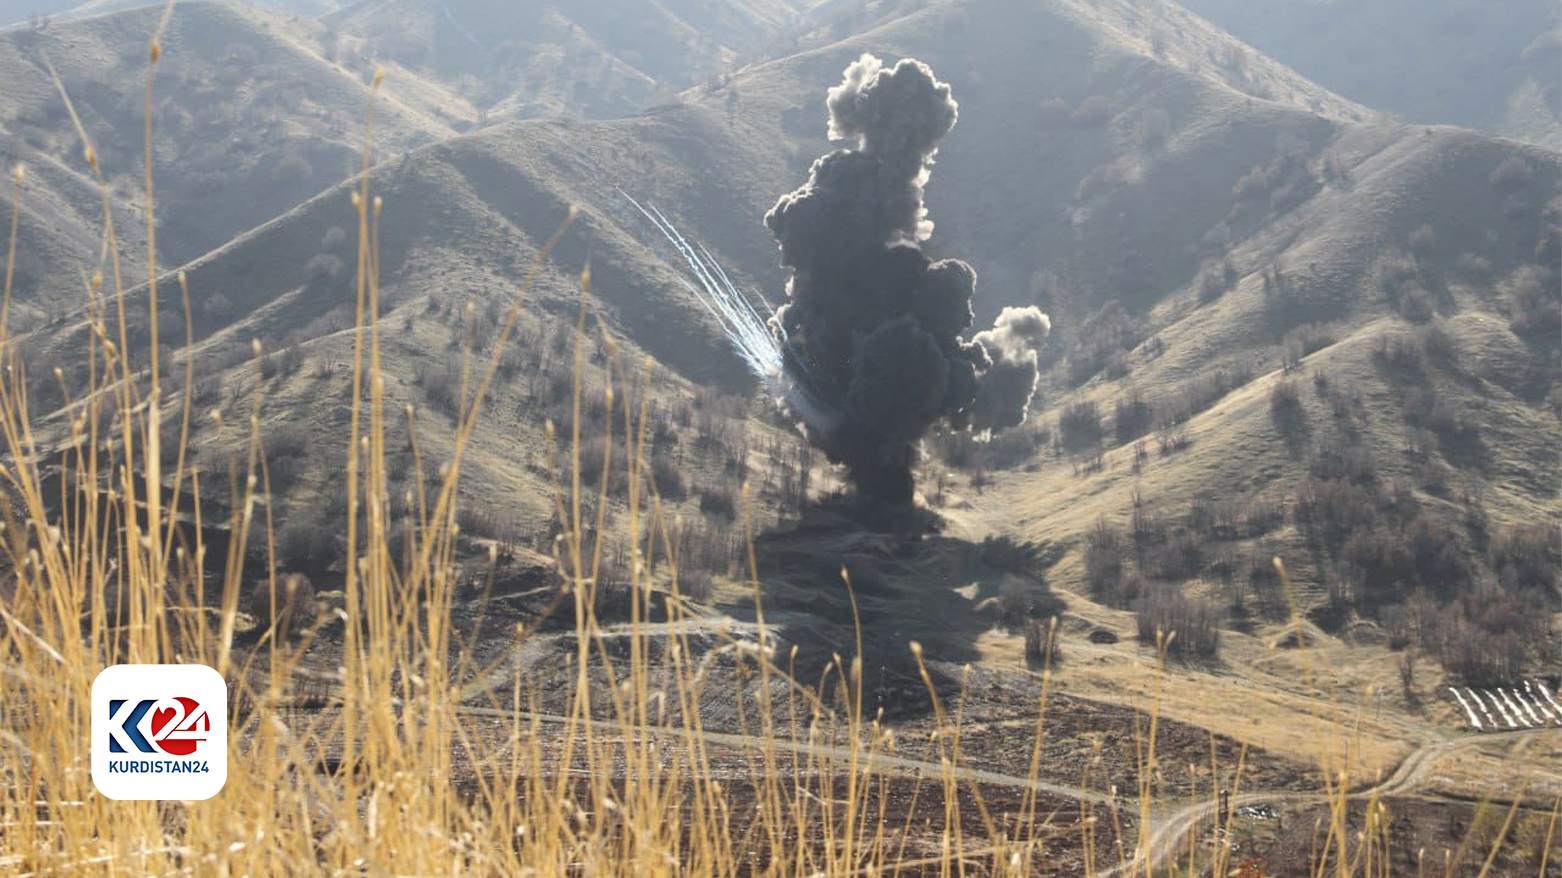 An IKMAA demining team exploded the landmines from a distance. (Photo: IKMAA)